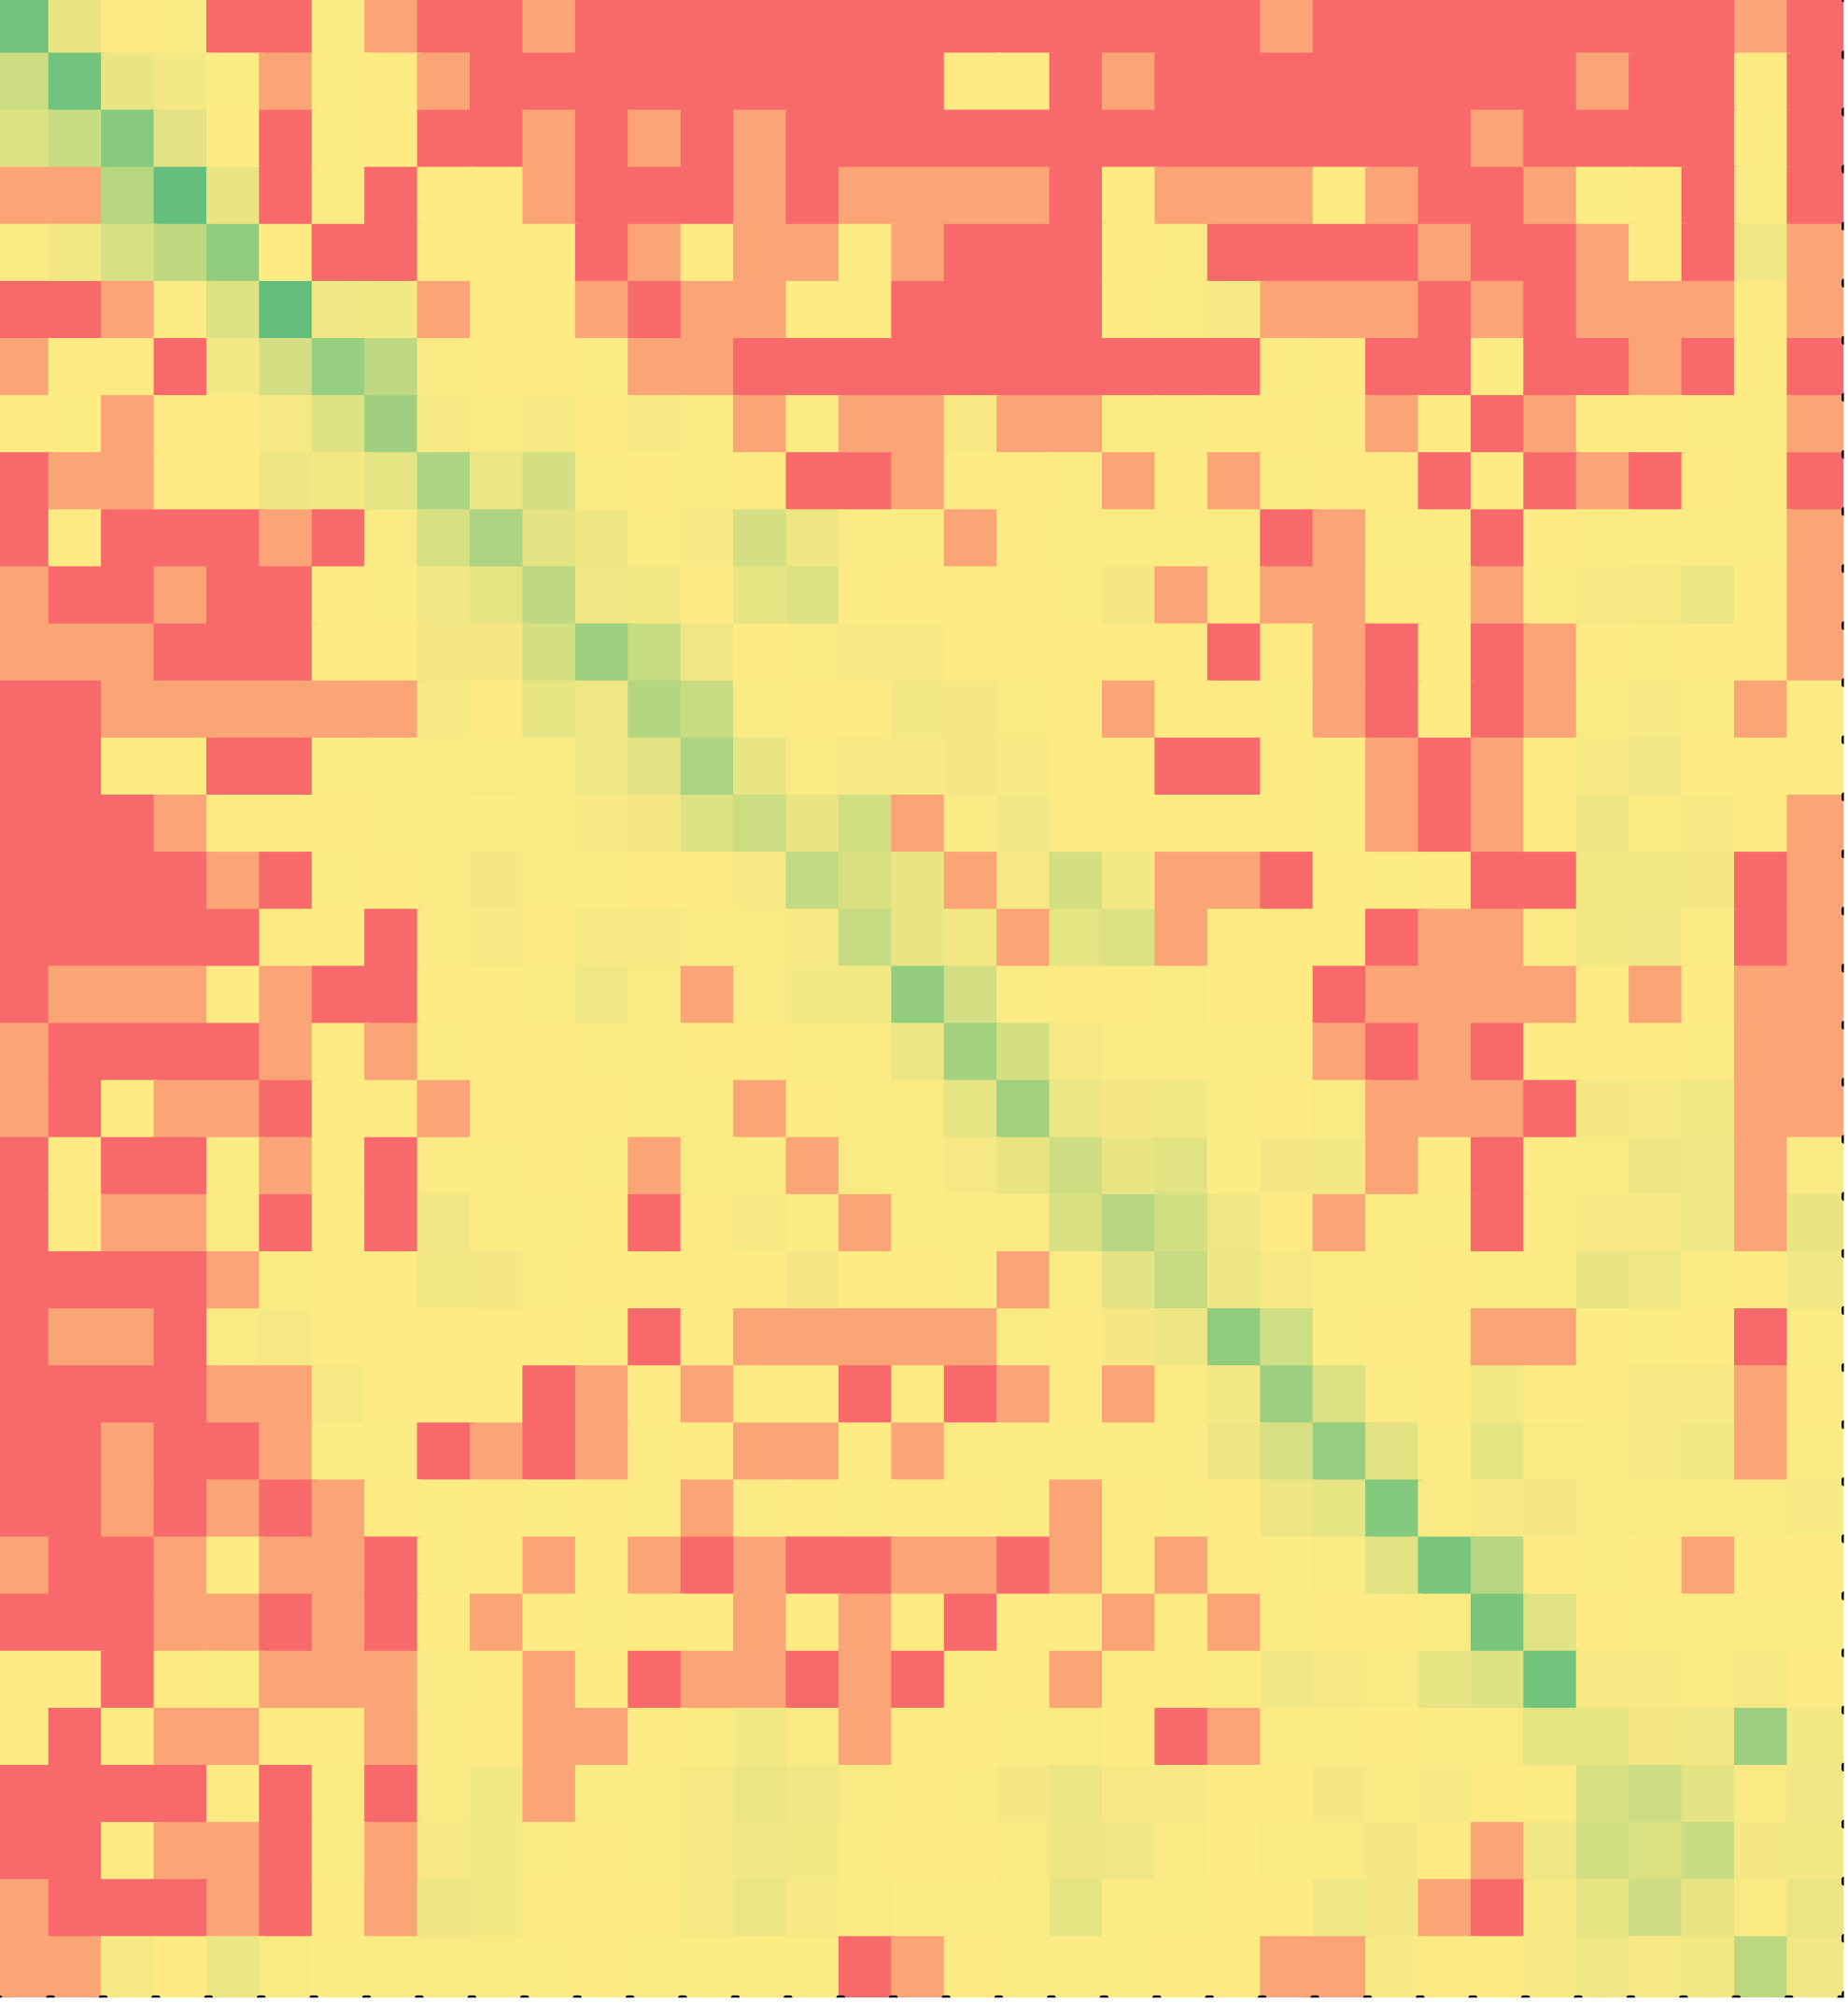 Heat map of non-minimal Java solutions for the second if-else puzzle.